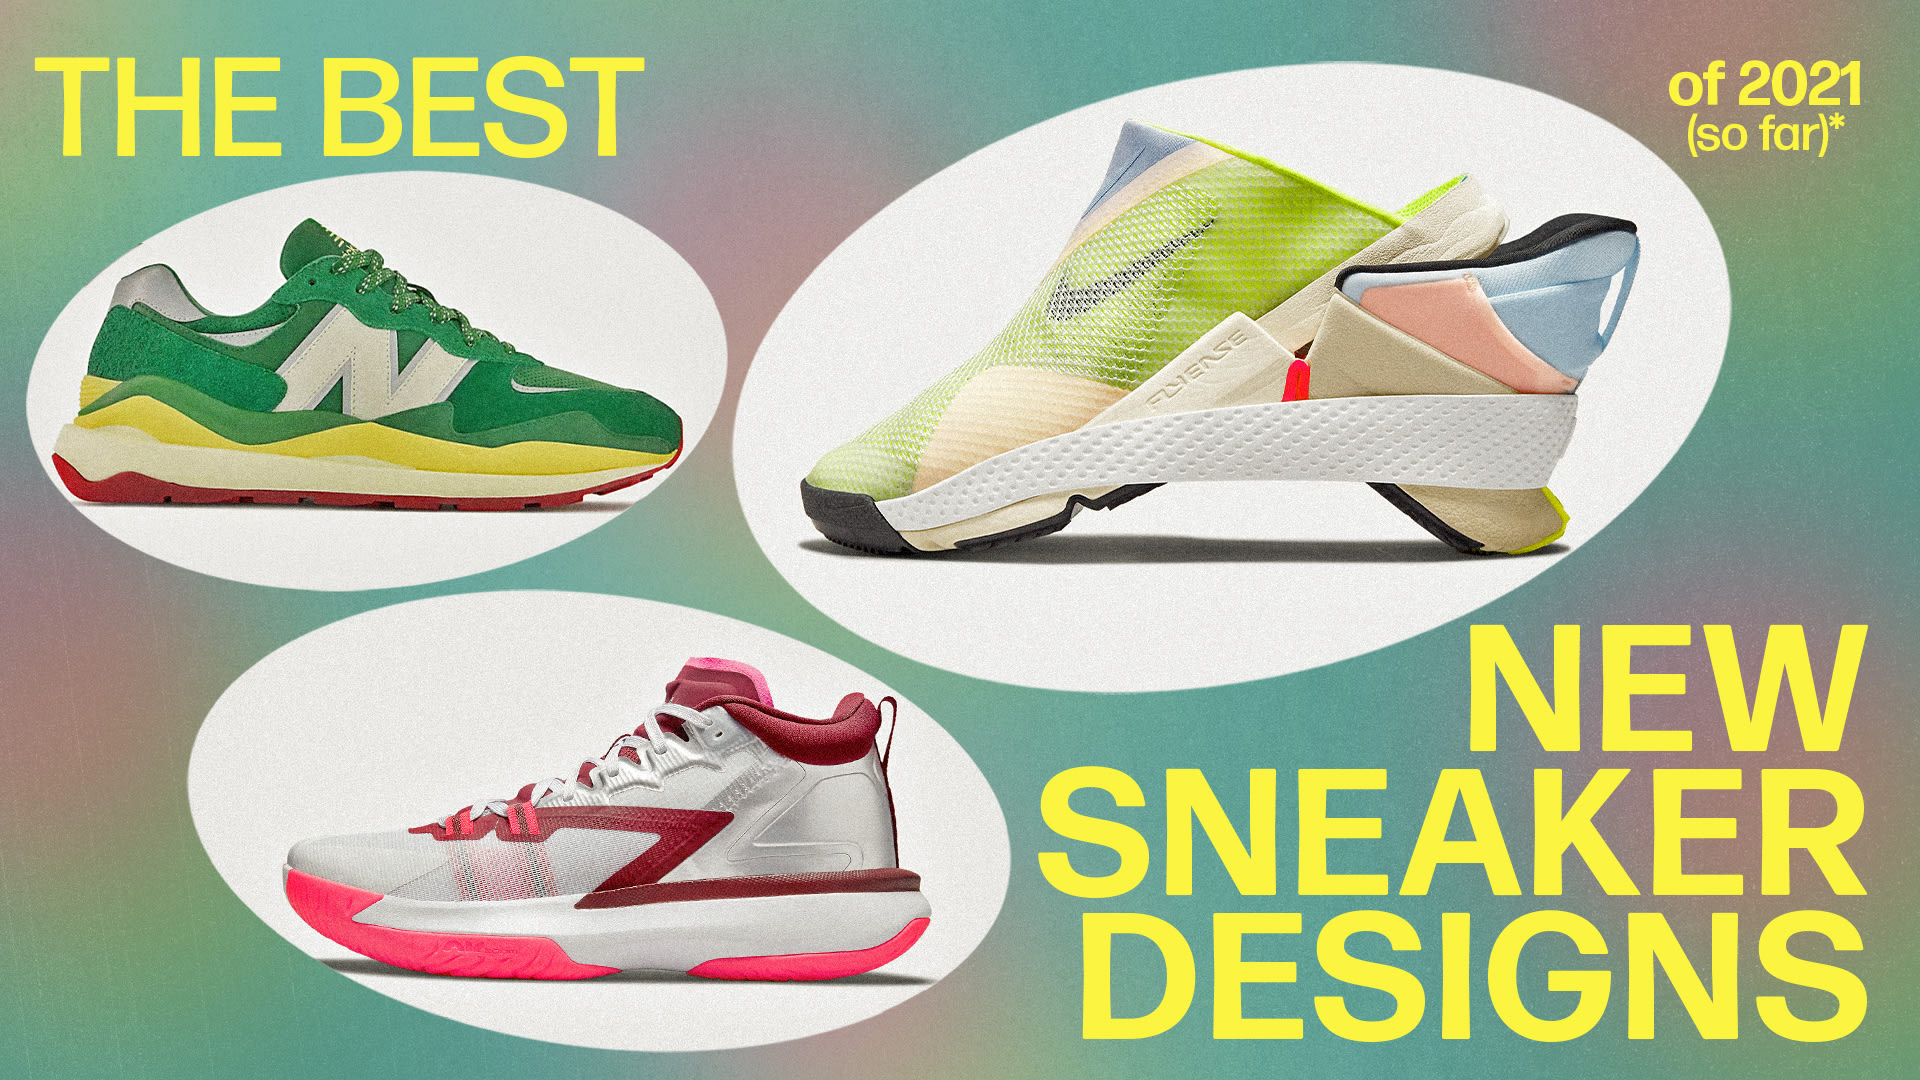 Best New Sneaker Designs 2021: Top New Sneaker Designs of The Year (So ...